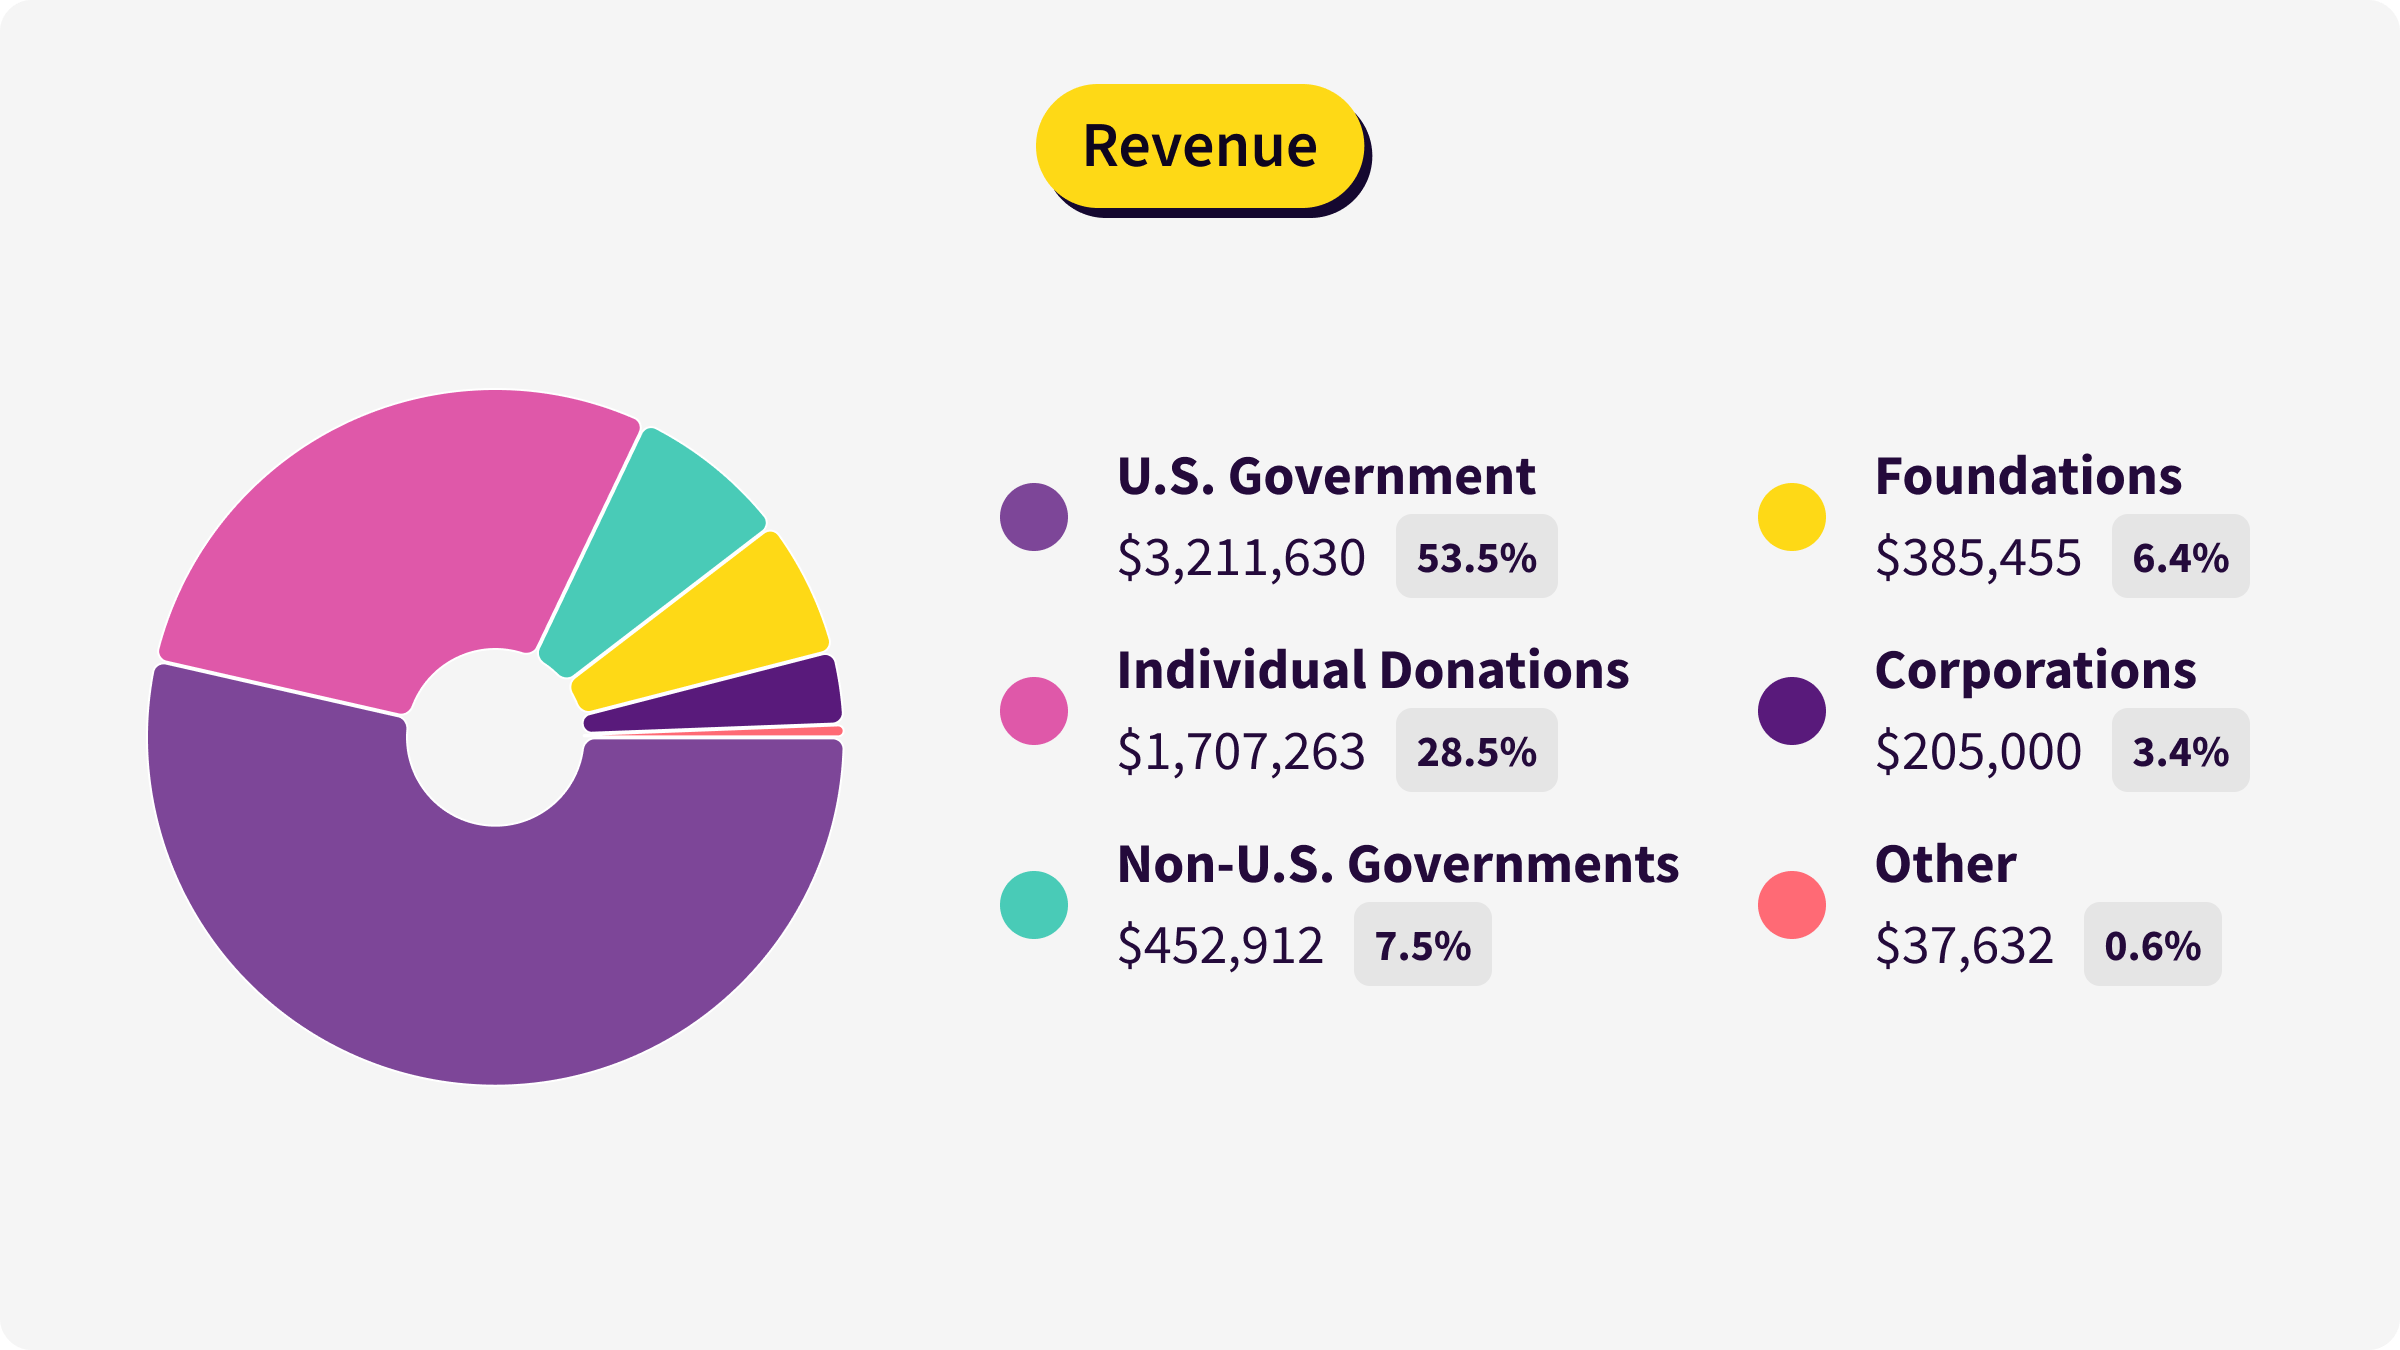 Pie chart illustrating the revenue sources and proportions